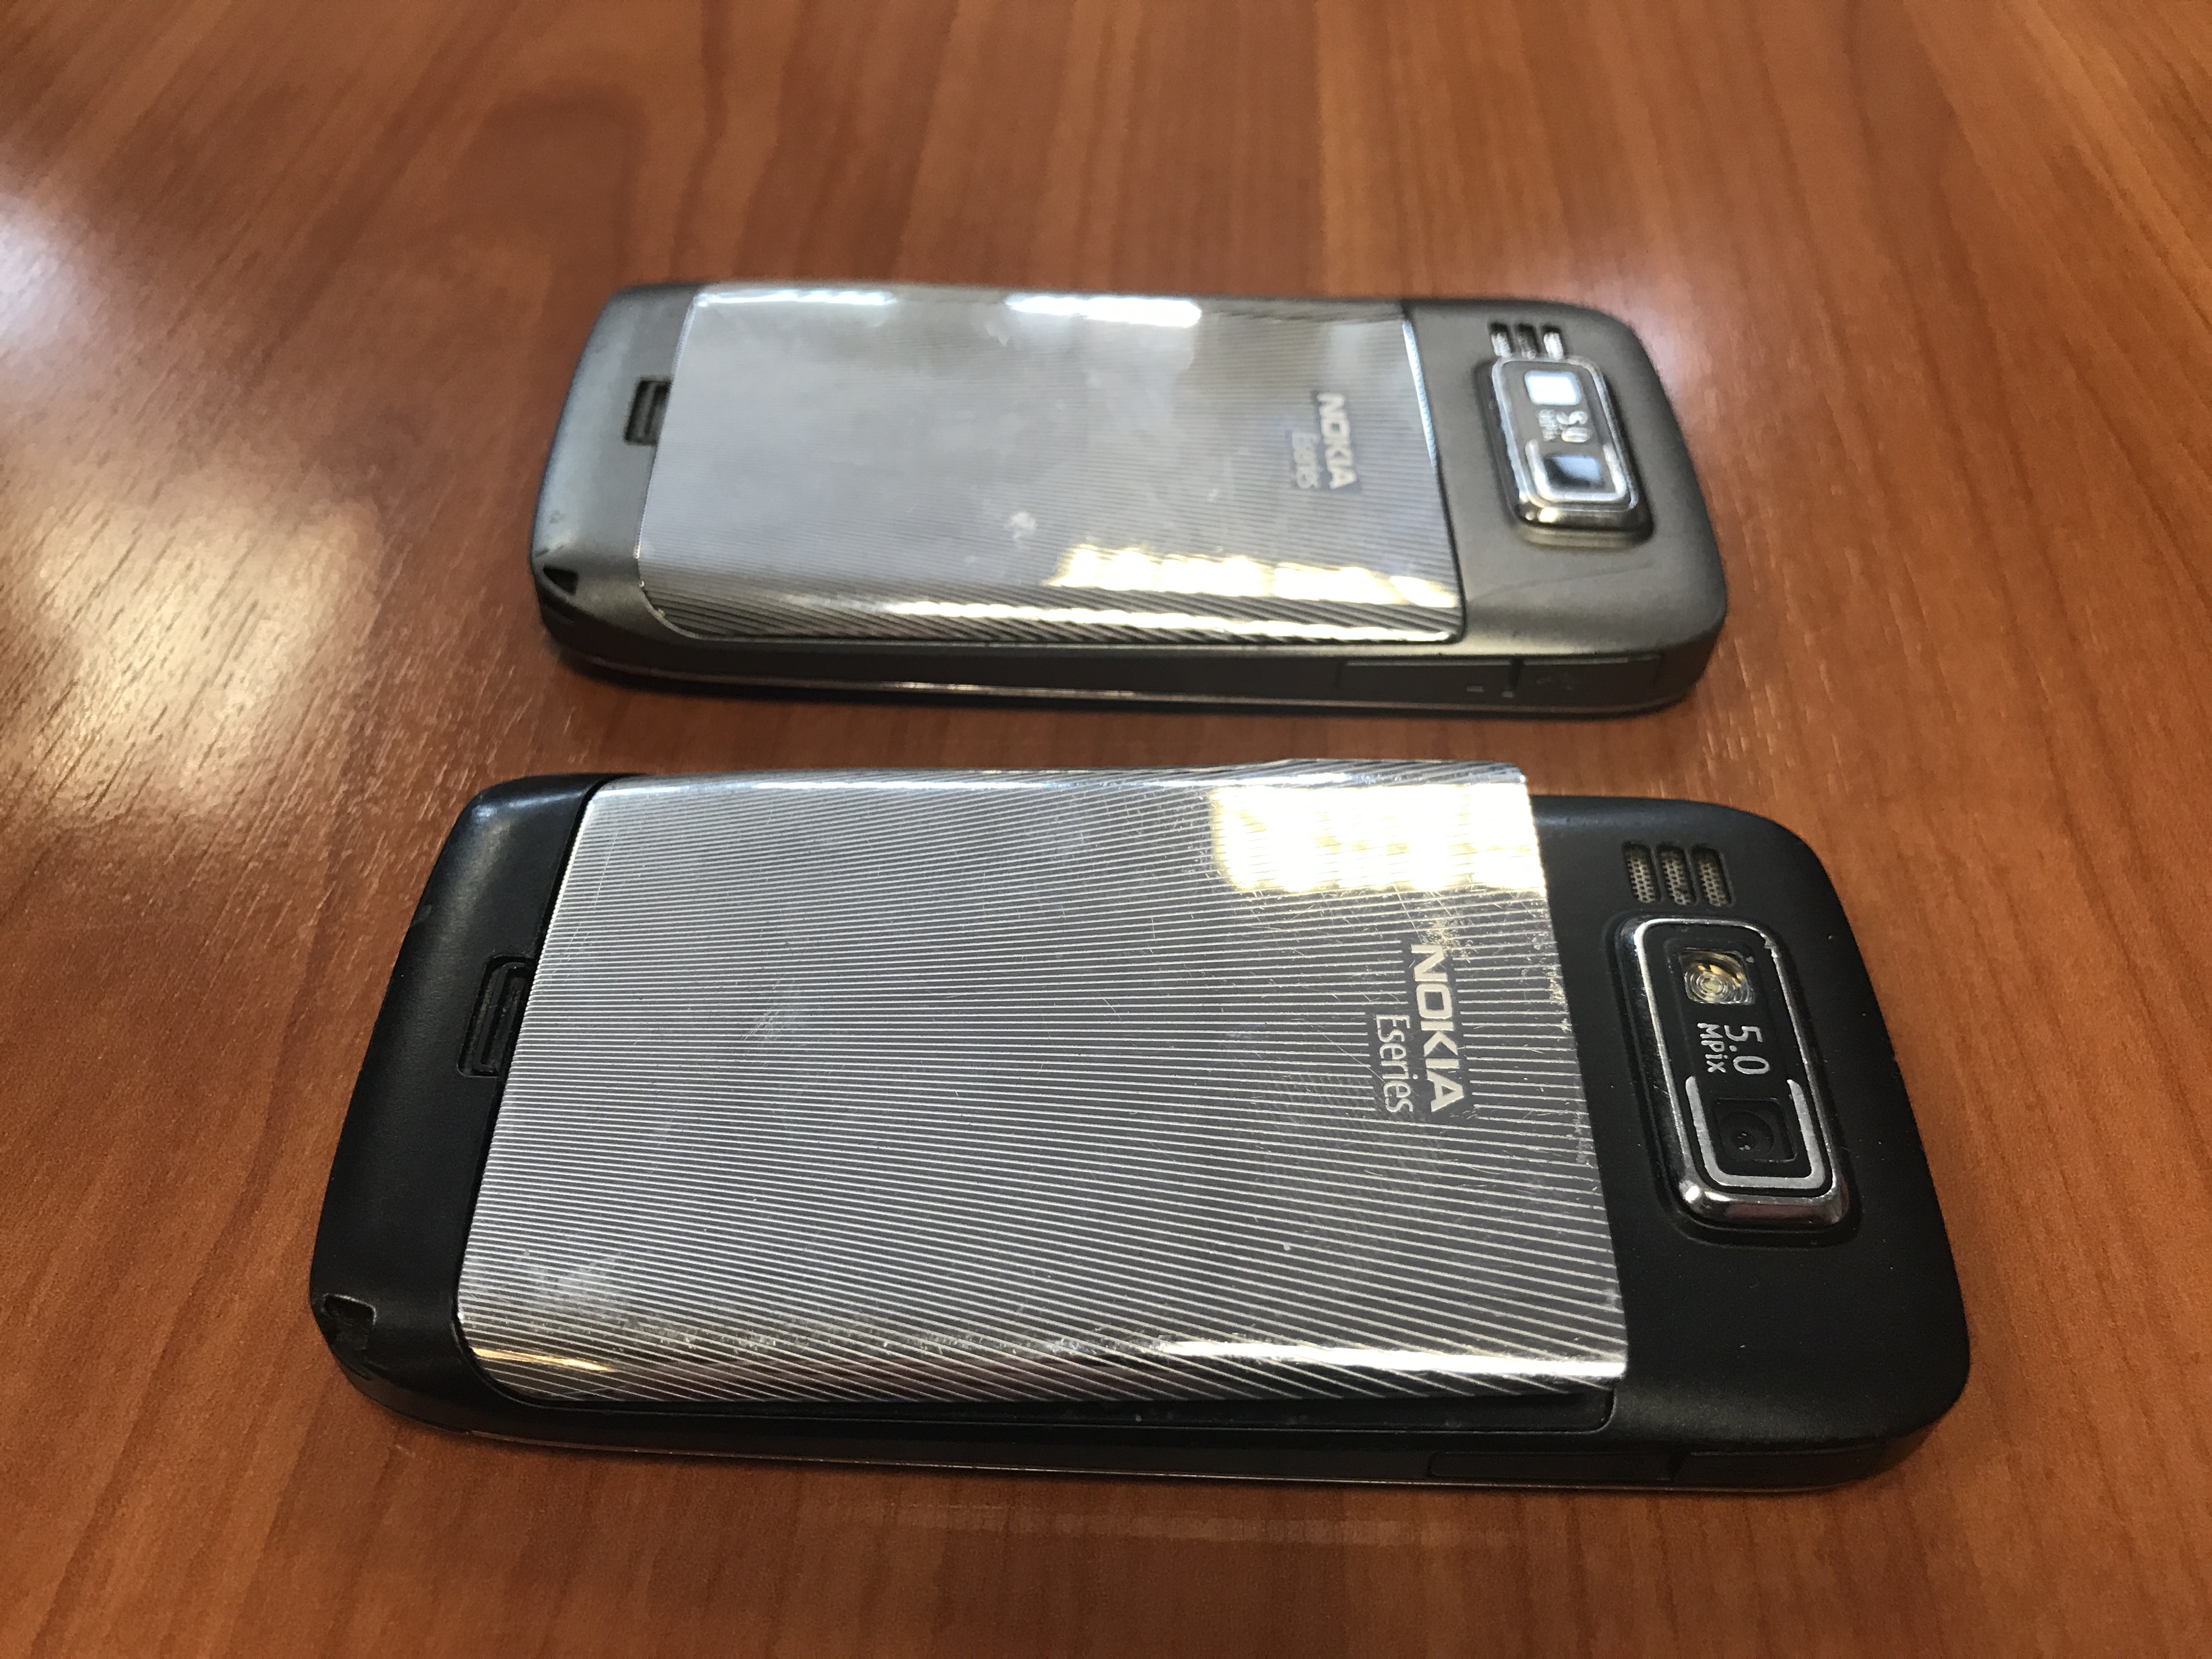 2 x Nokia E72 Mobile phones, One Phone Damaged, (No Chargers)